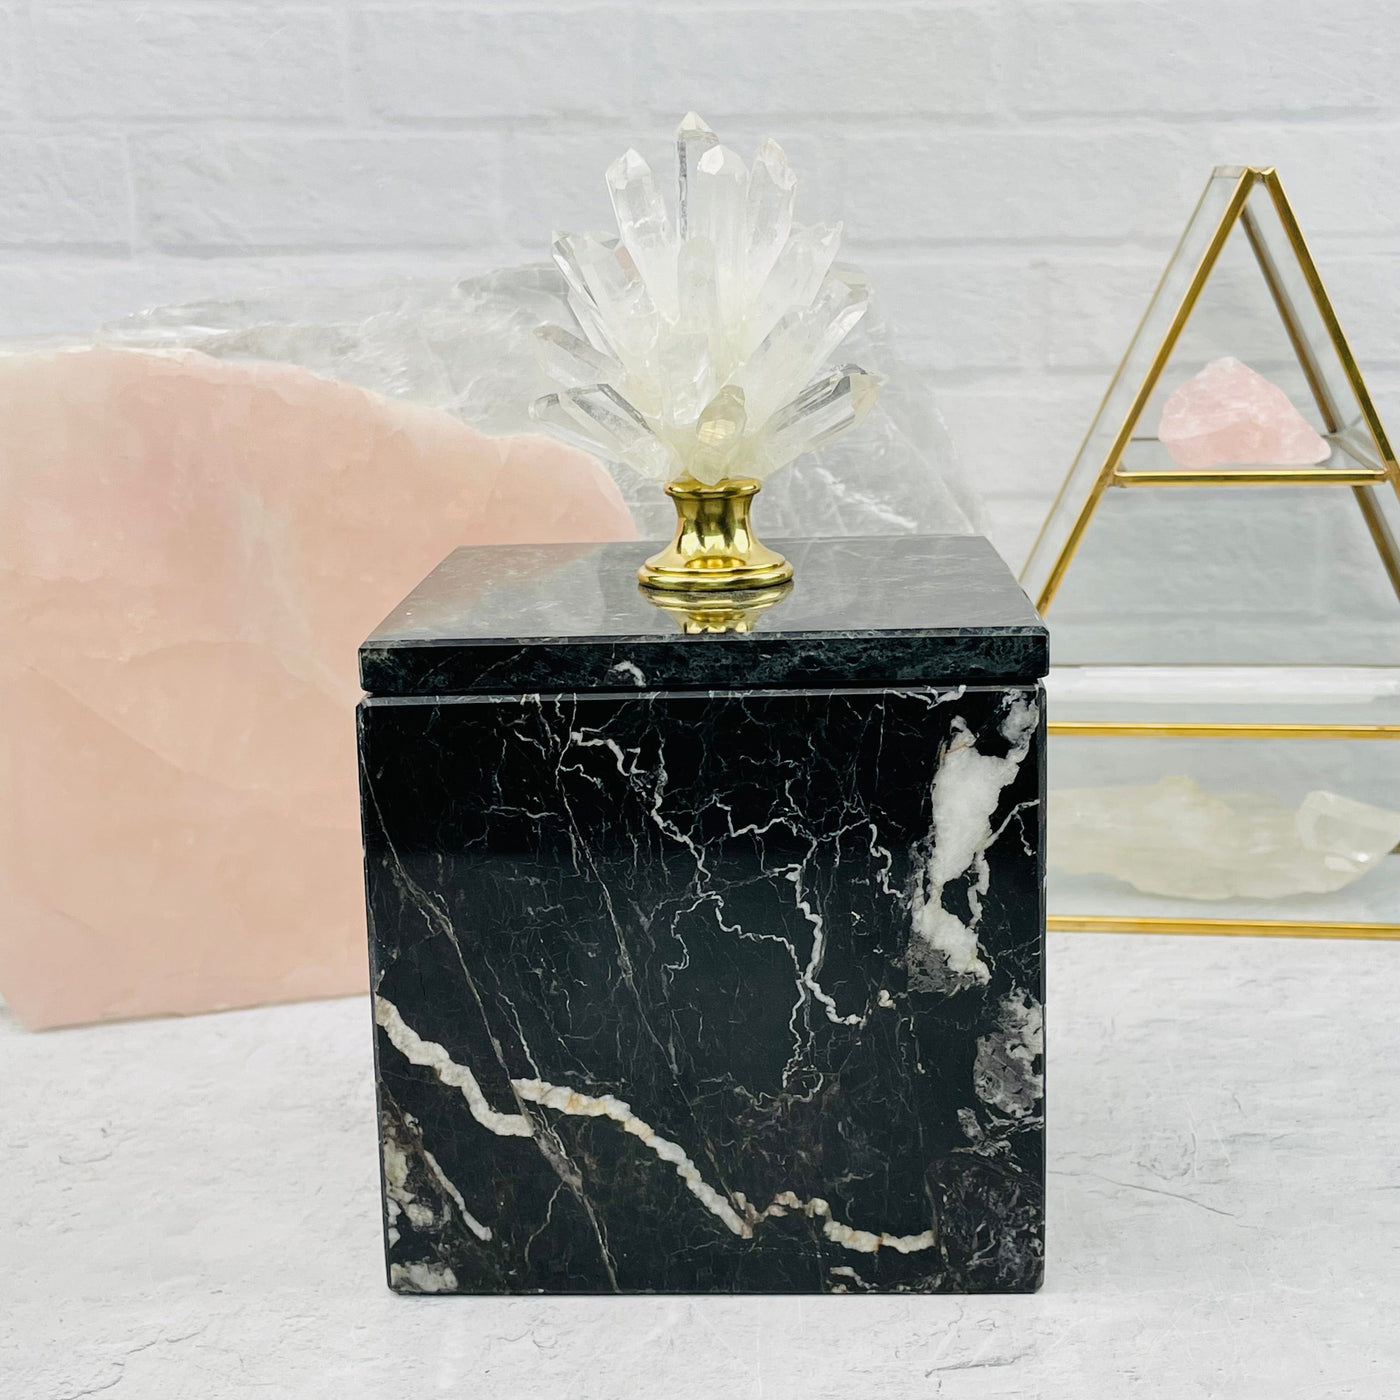  crystal point pinecone on marble box with decorations in the background